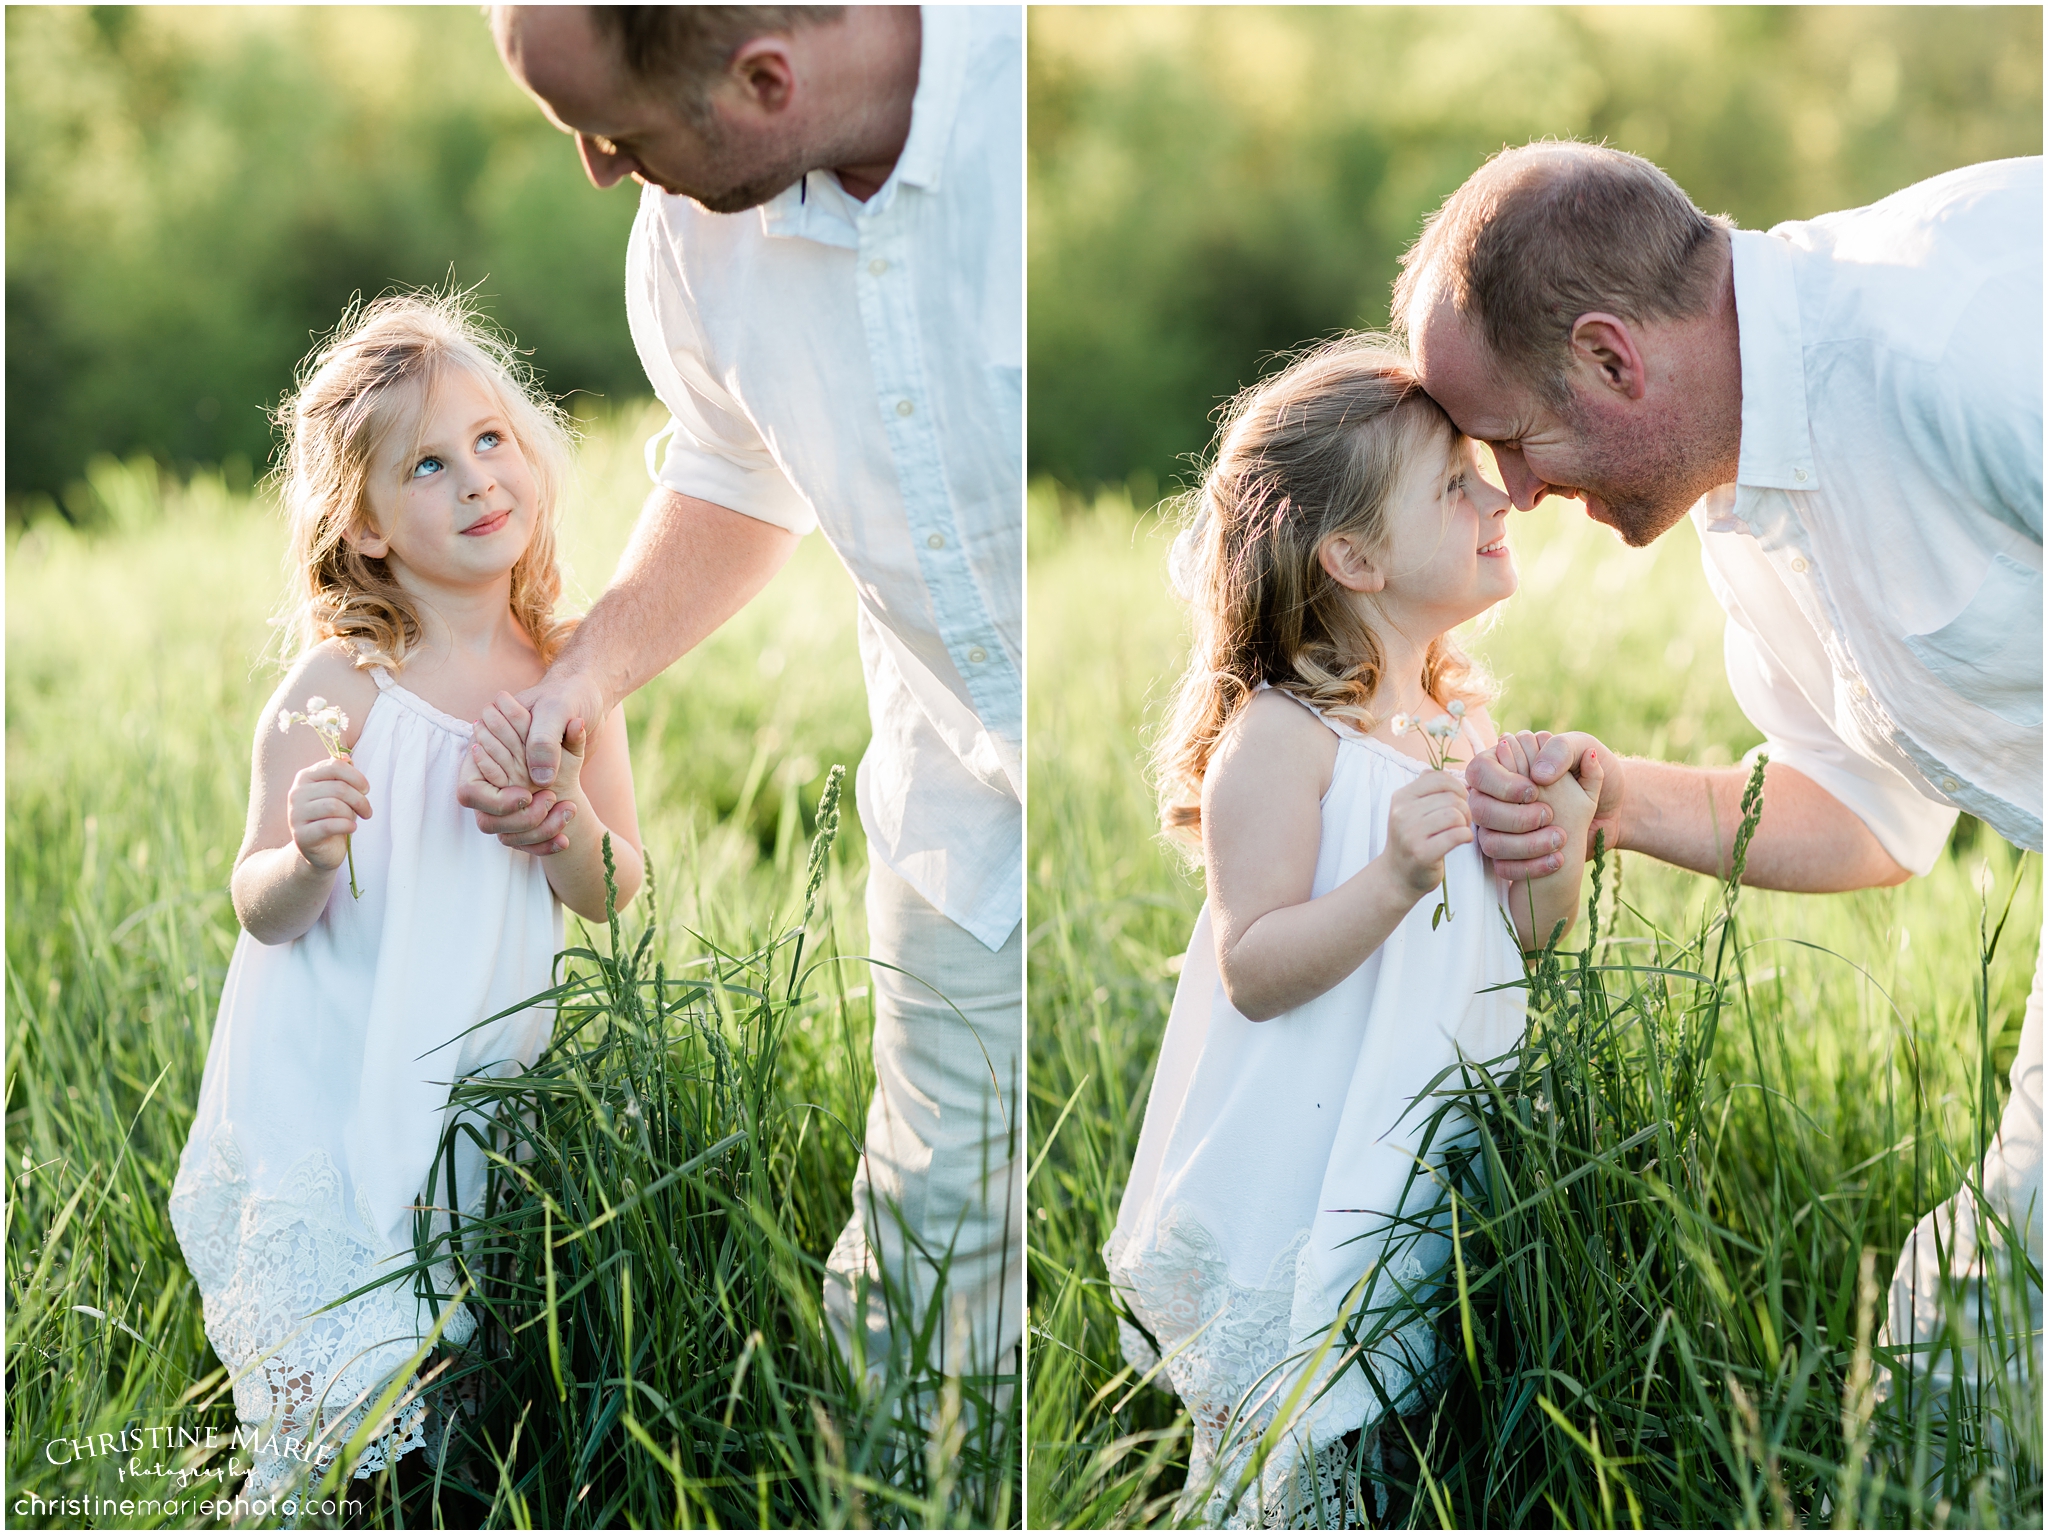 daddy and daughter image, true love 